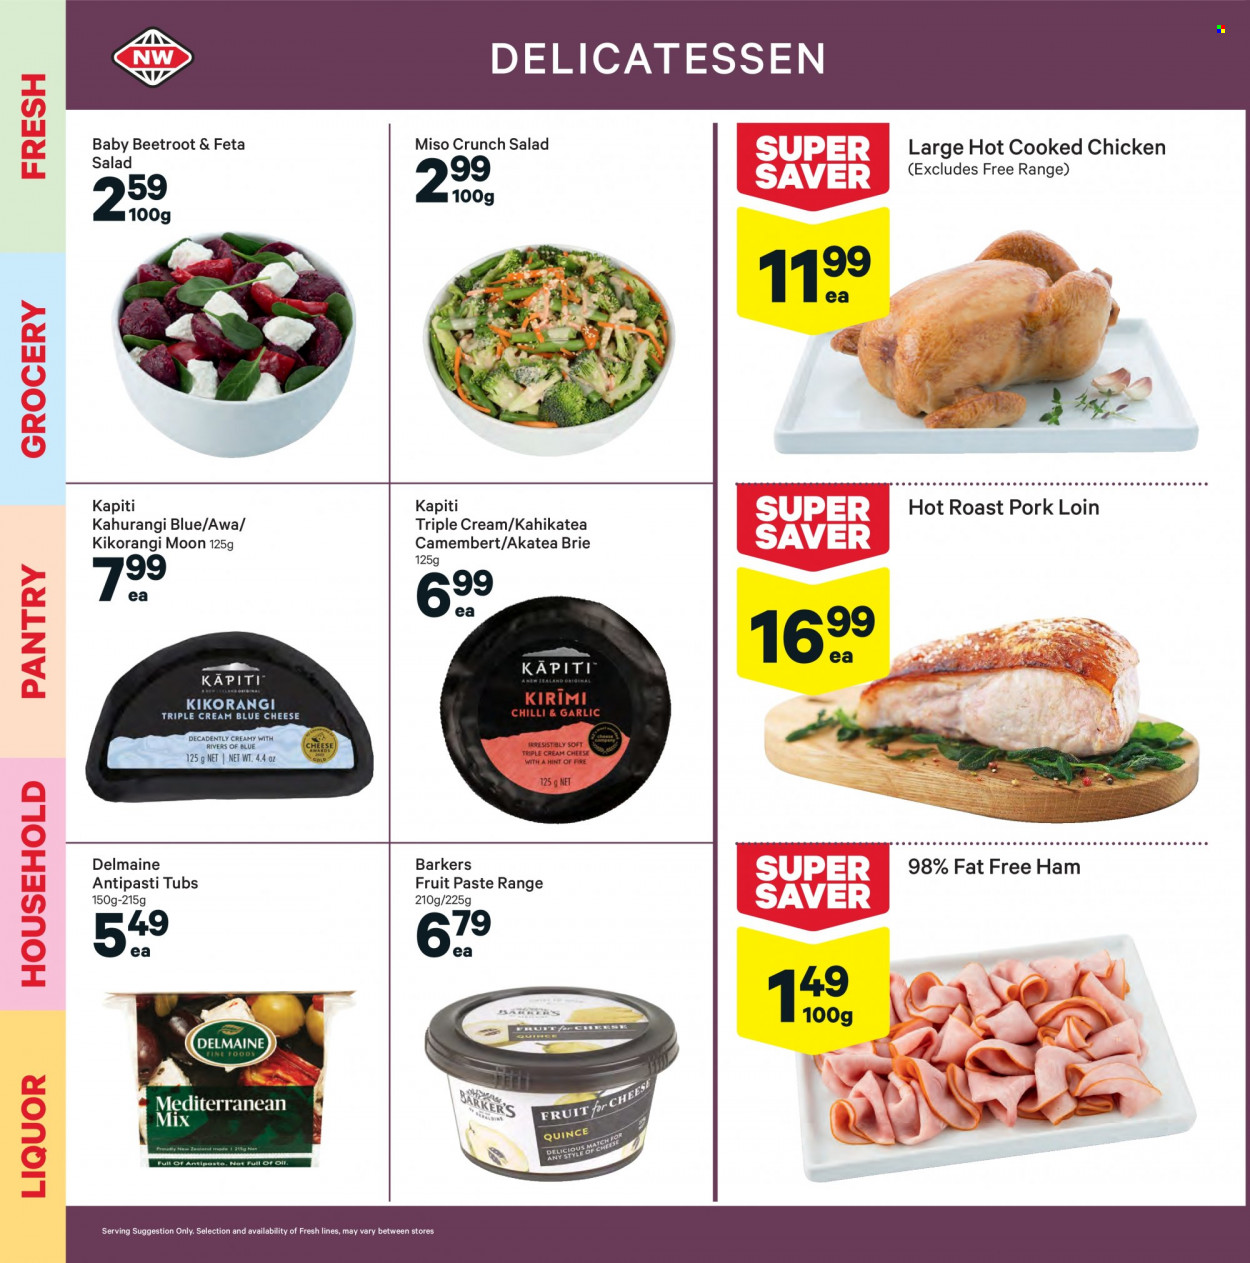 thumbnail - New World mailer - 13.09.2021 - 19.09.2021 - Sales products - quince, salad, beetroot, Delmaine, blue cheese, camembert, cream cheese, cheese, brie, KĀPITI, feta, miso, pork loin, pork meat. Page 6.